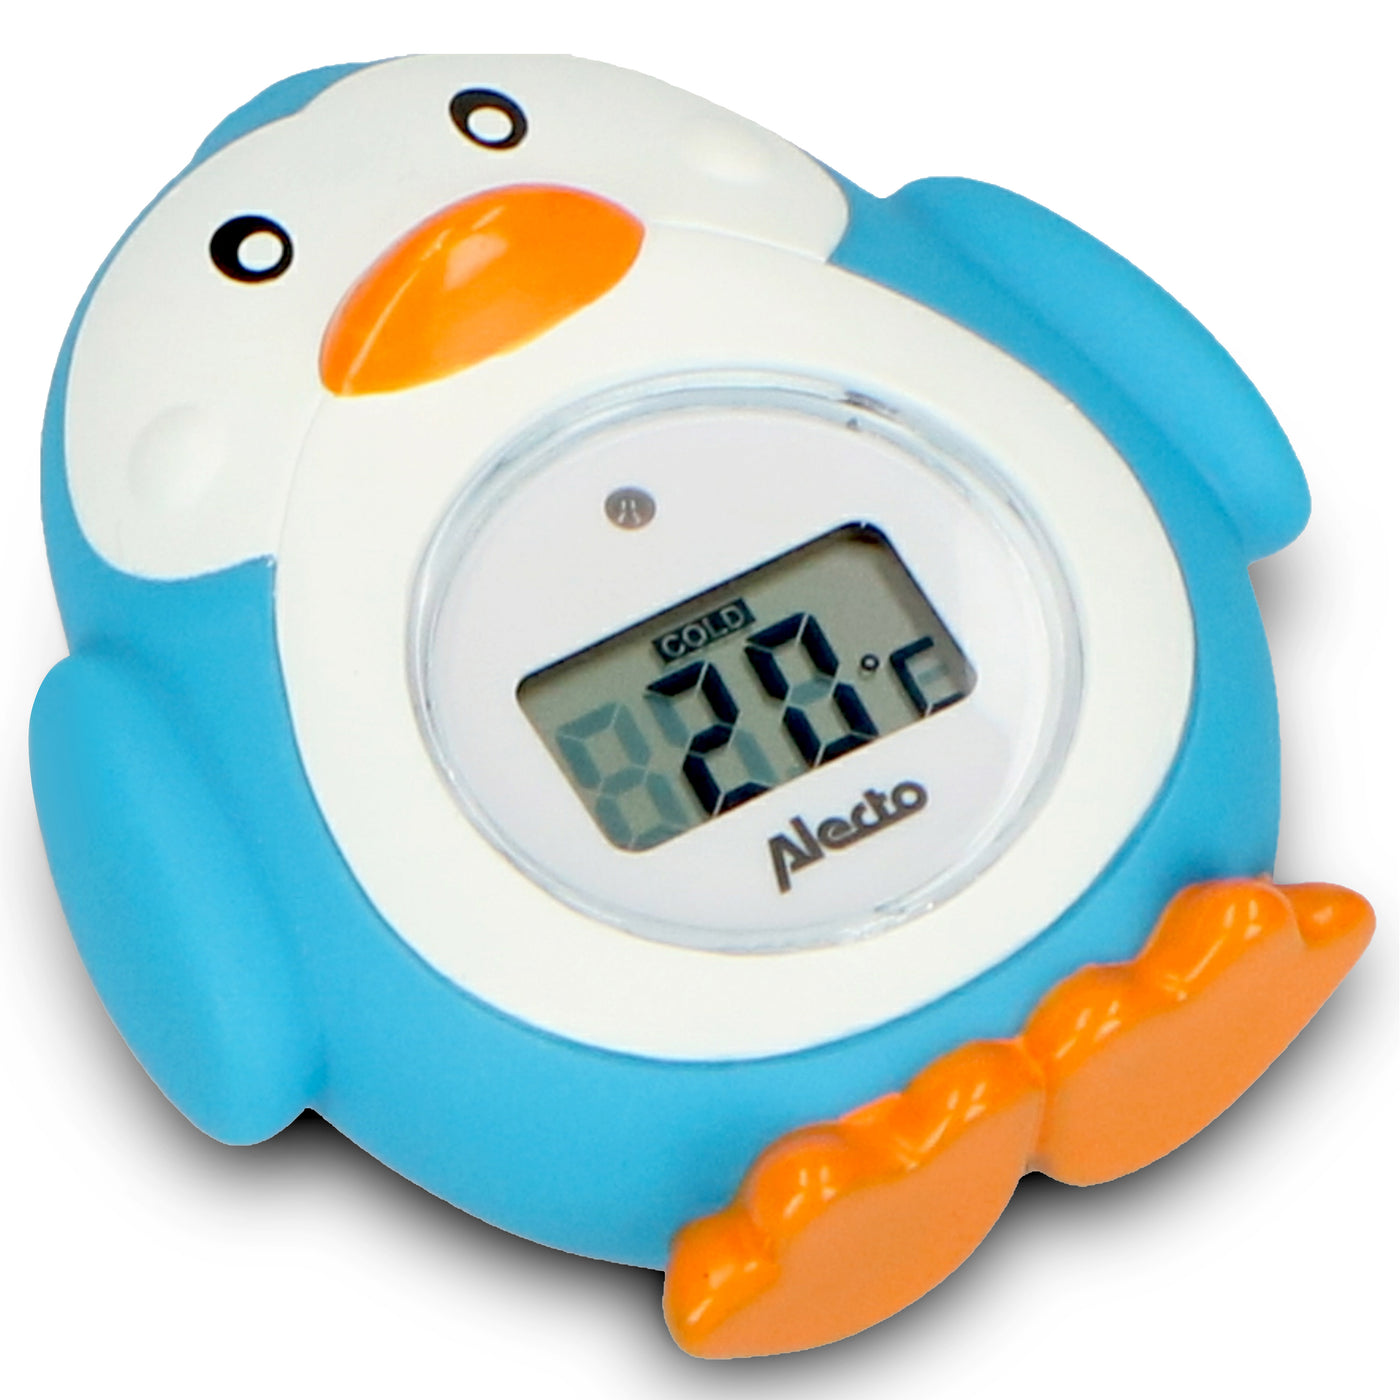 Alecto BC-11 PENGUIN - Bath and room thermometer, penguin